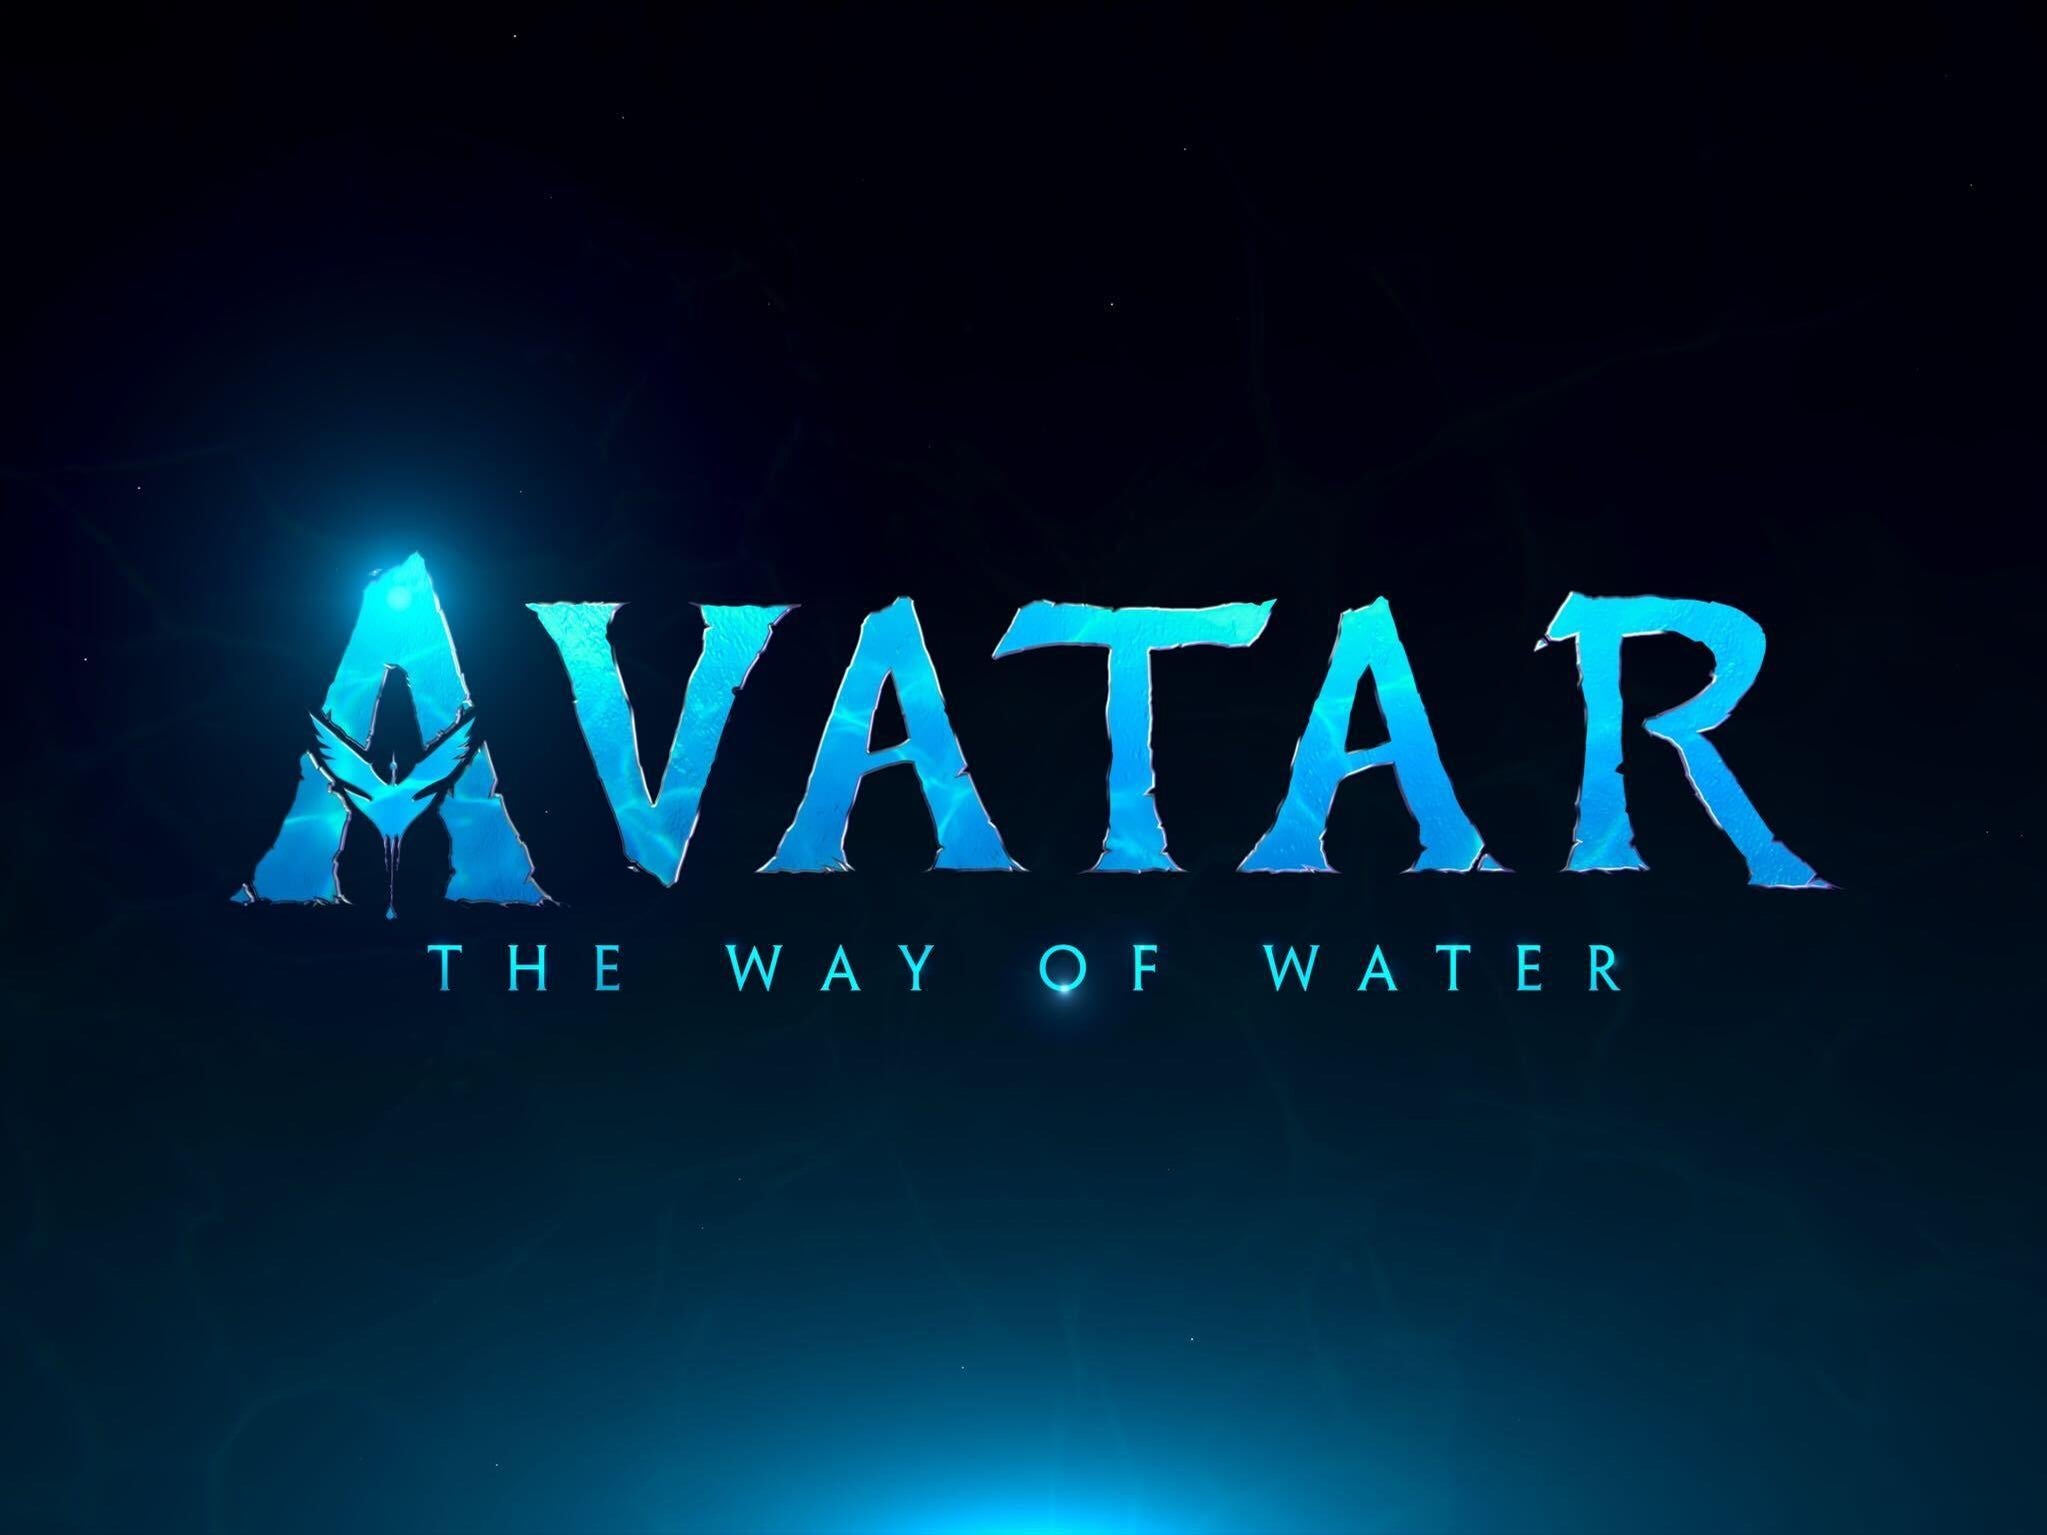 Logo revealed for Avatar's most awaited sequel - Avatar: The Way of Water